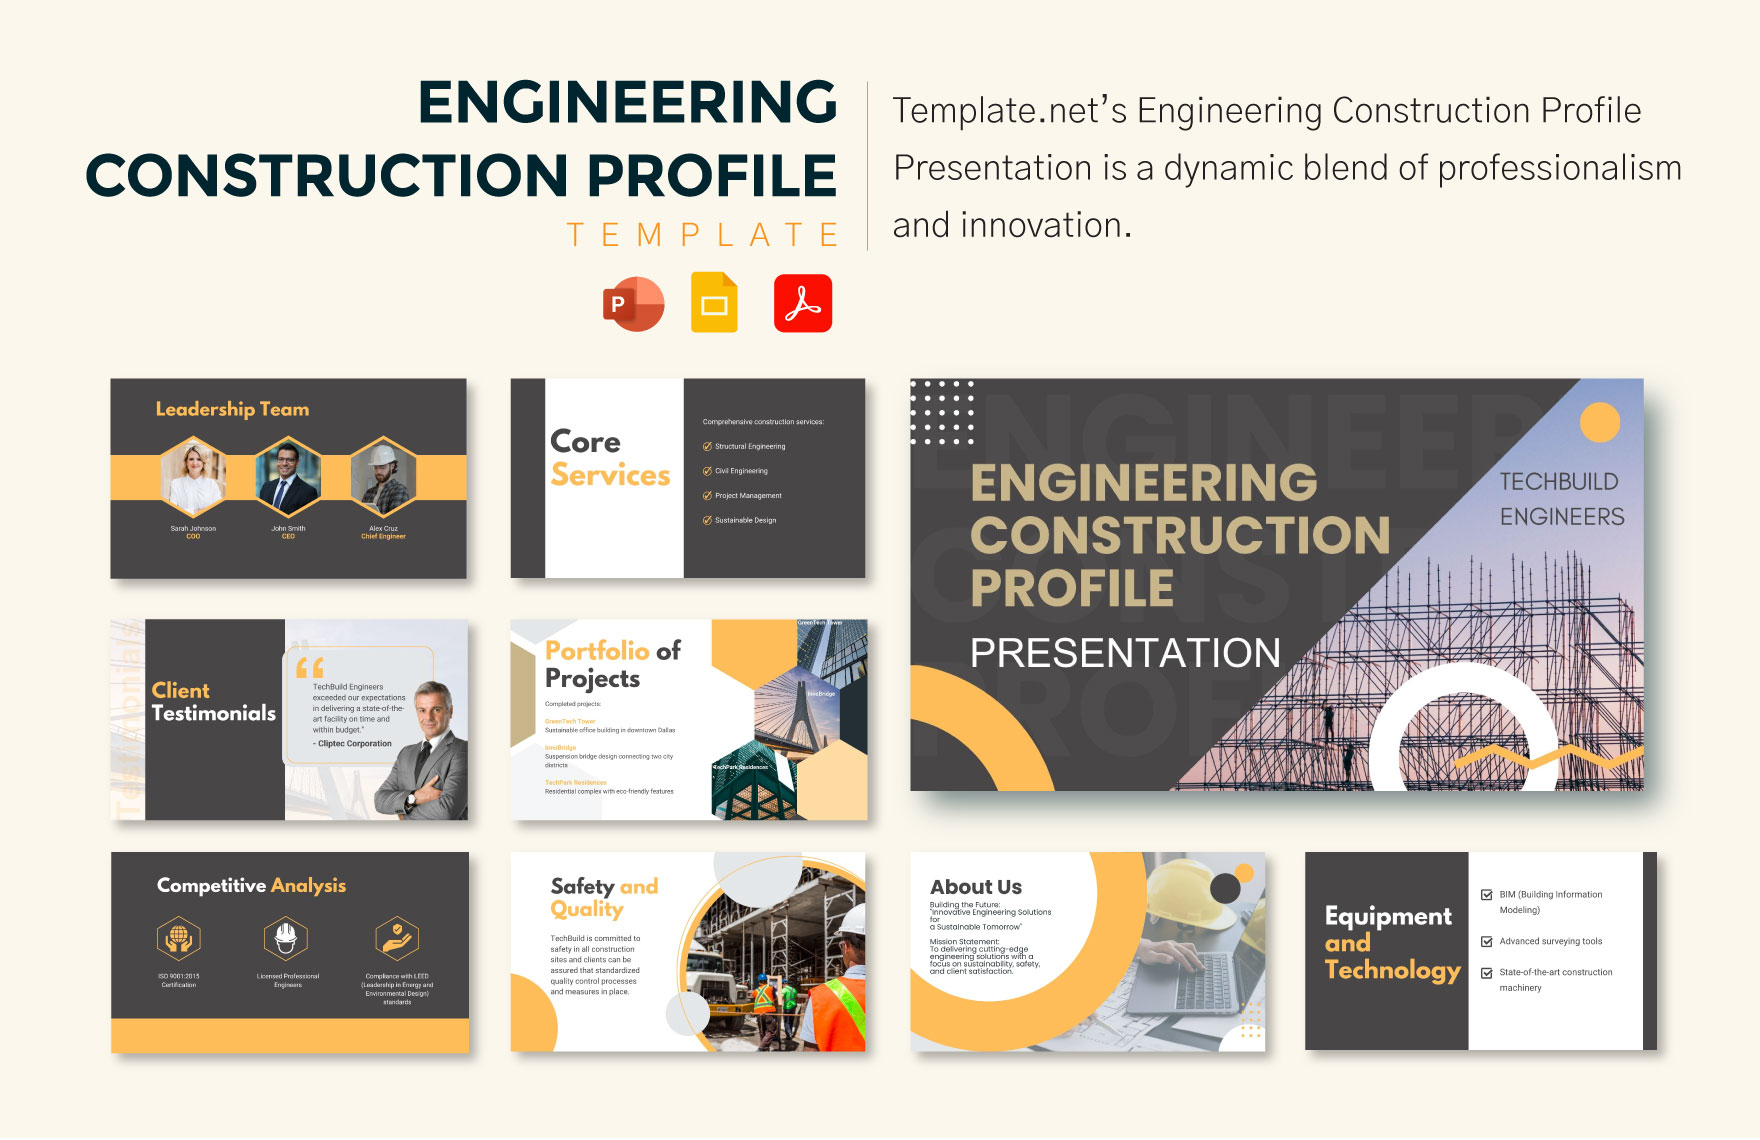 Engineering Construction Profile Template